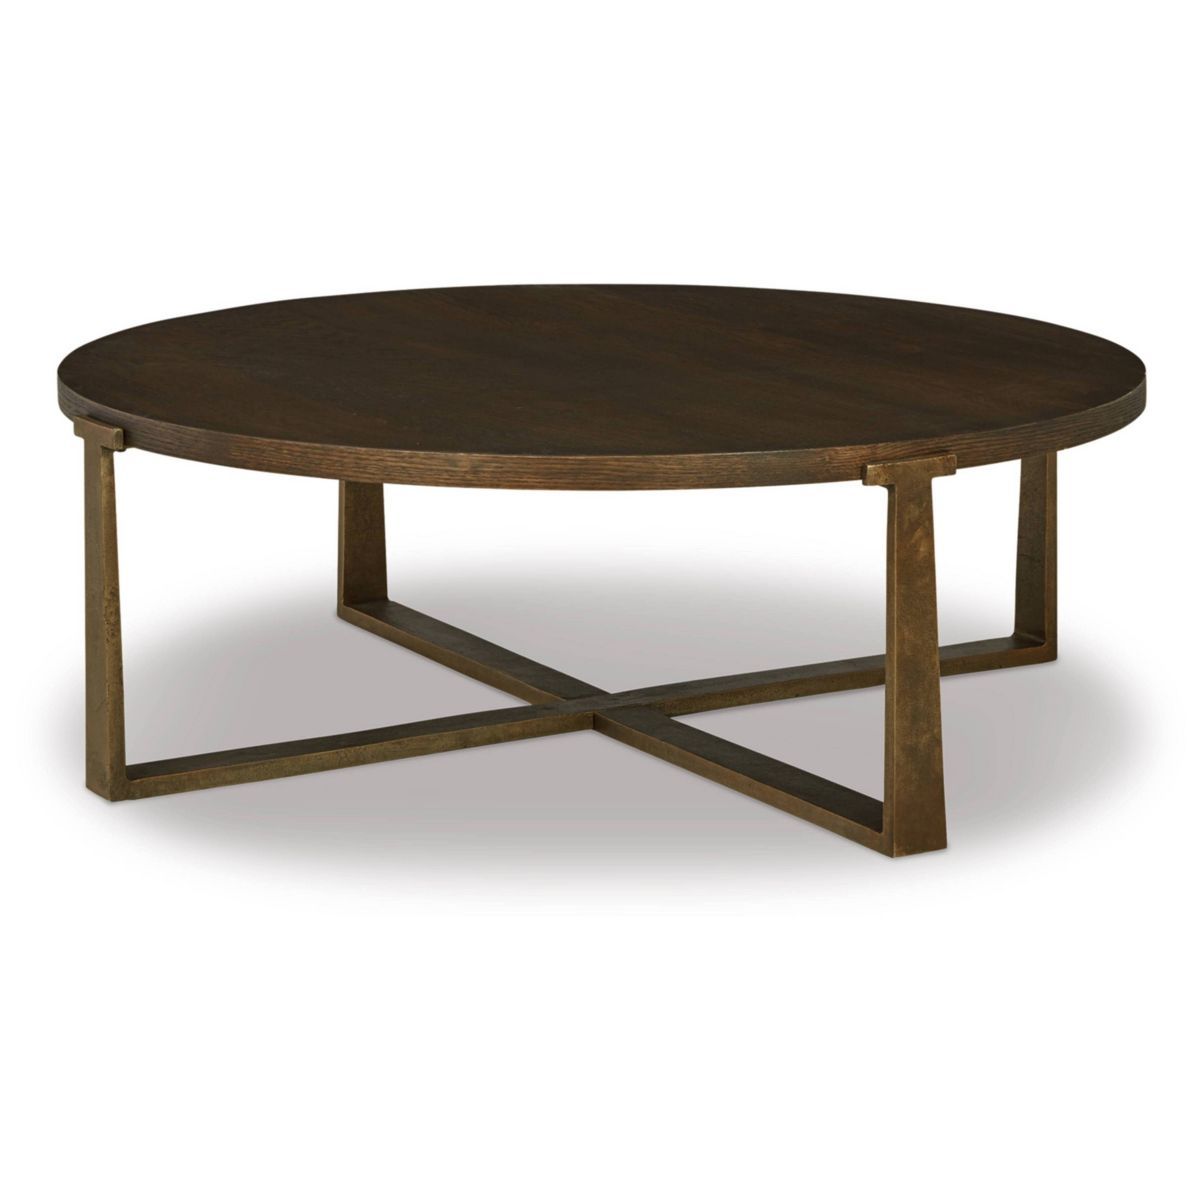 Balintmore Round Coffee Table Metallic Brown/Beige - Signature Design by Ashley | Target